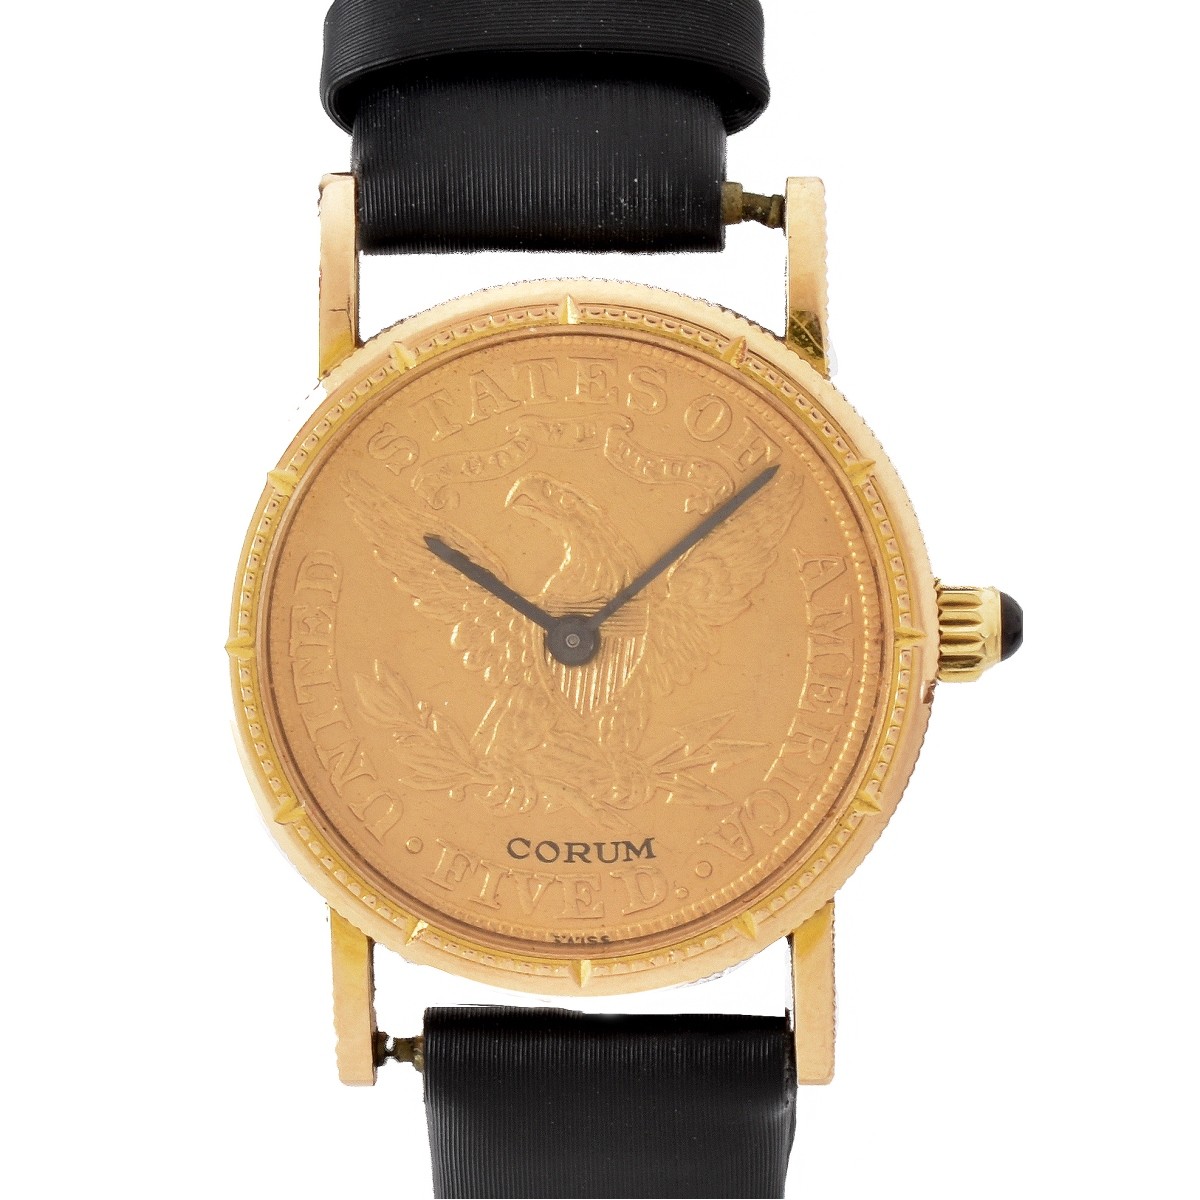 Lady's Corum Gold Coin Watch